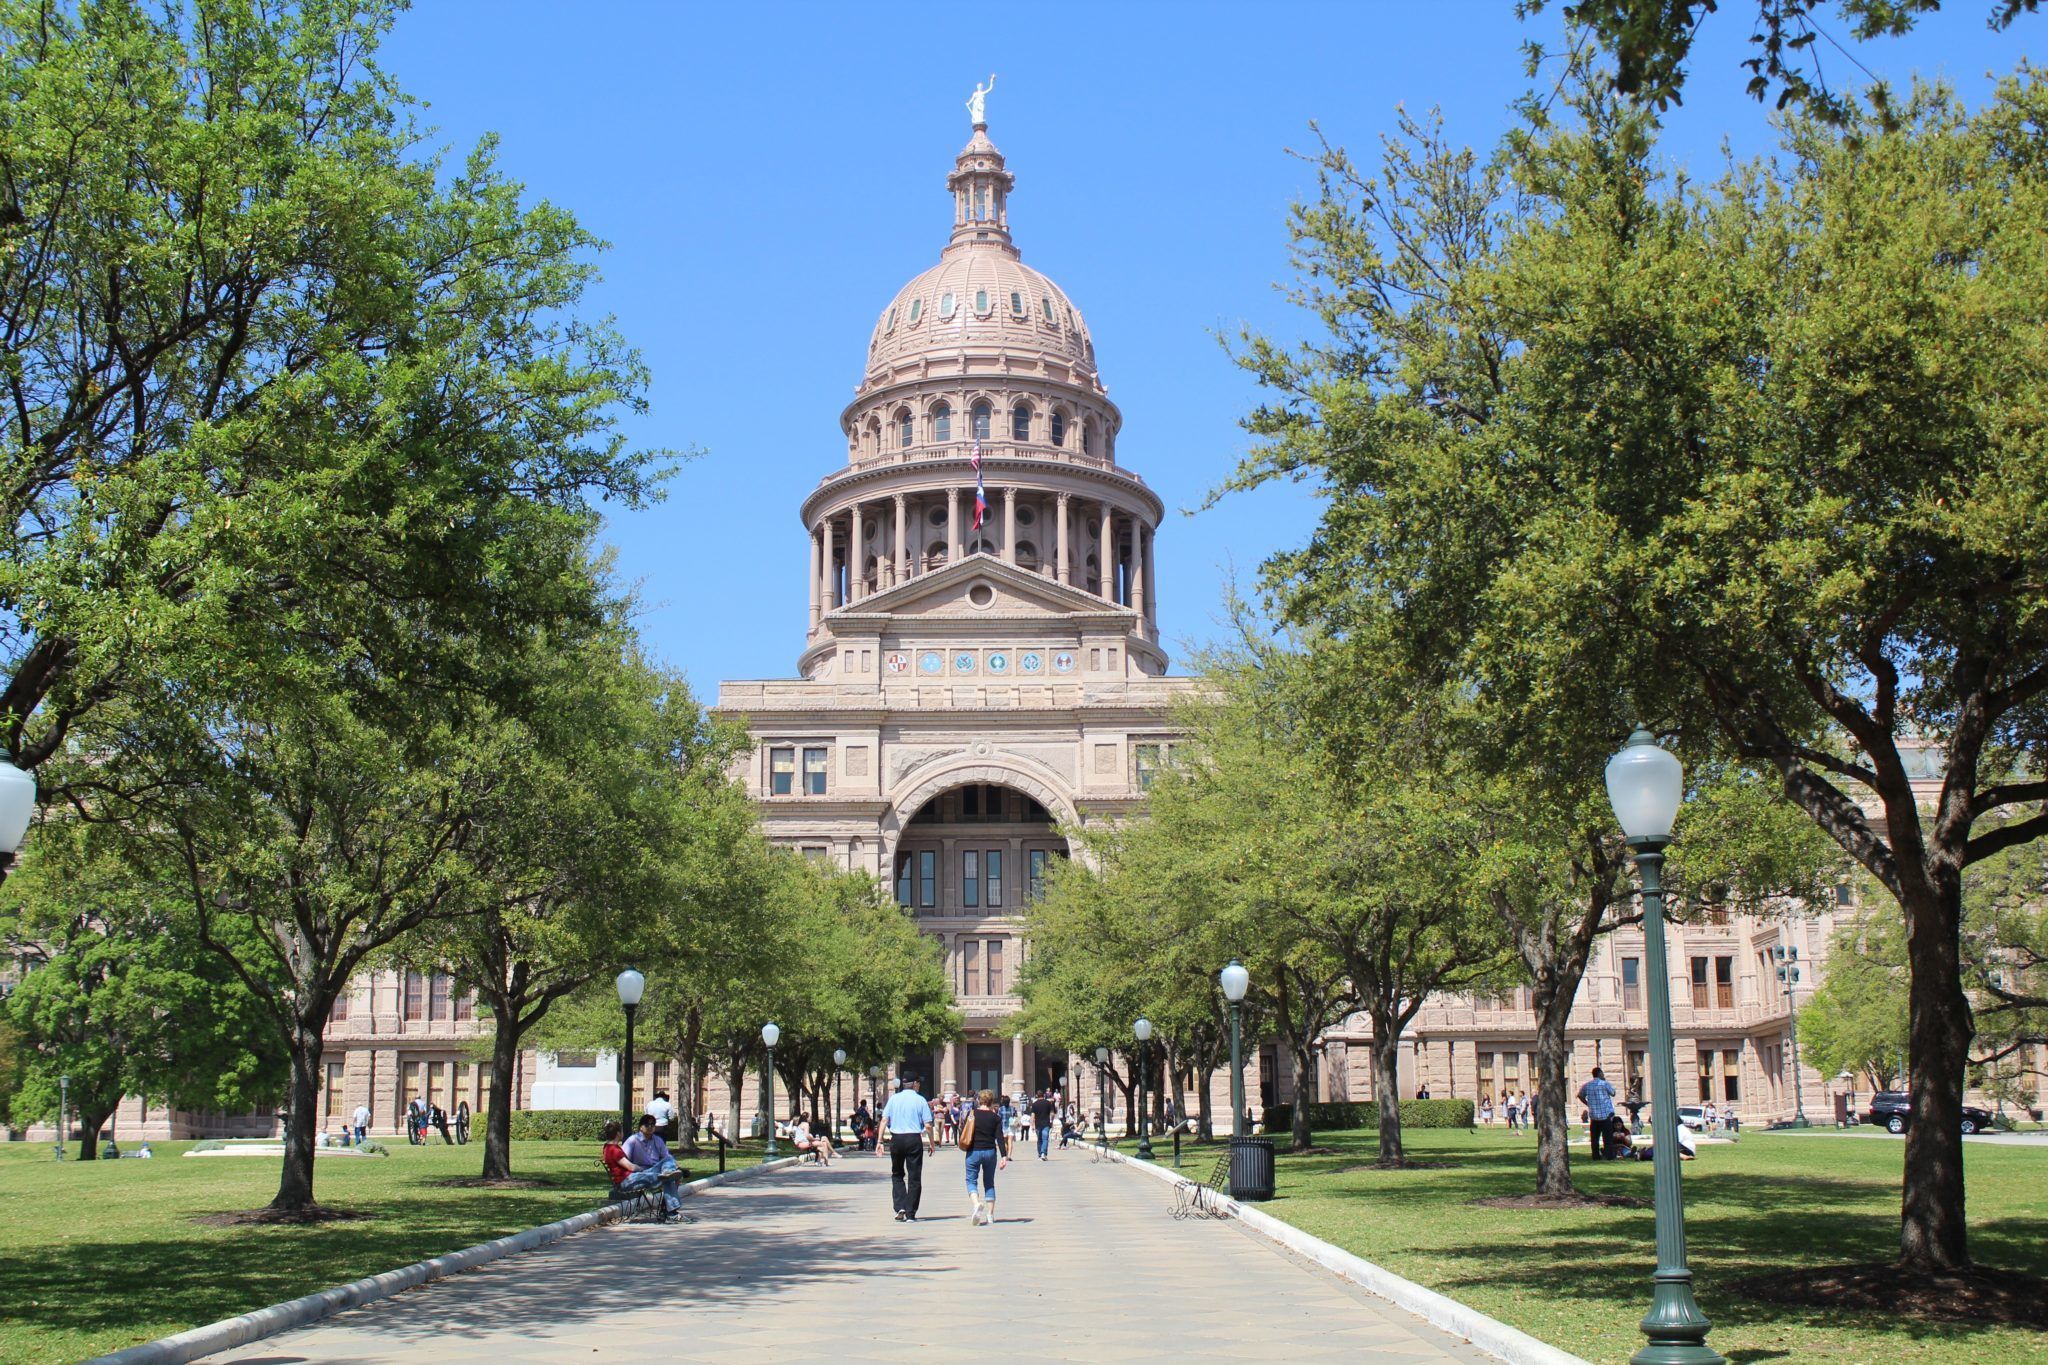 While the 2018 Farm Bill legalized industrial hemp, Texas still needs to reform its own "outdated" statutes, according to attorney Dan Sullivan. Photo: People walk along the tree-lined pathway to the Texas Capitol building, home of the Texas legislature.